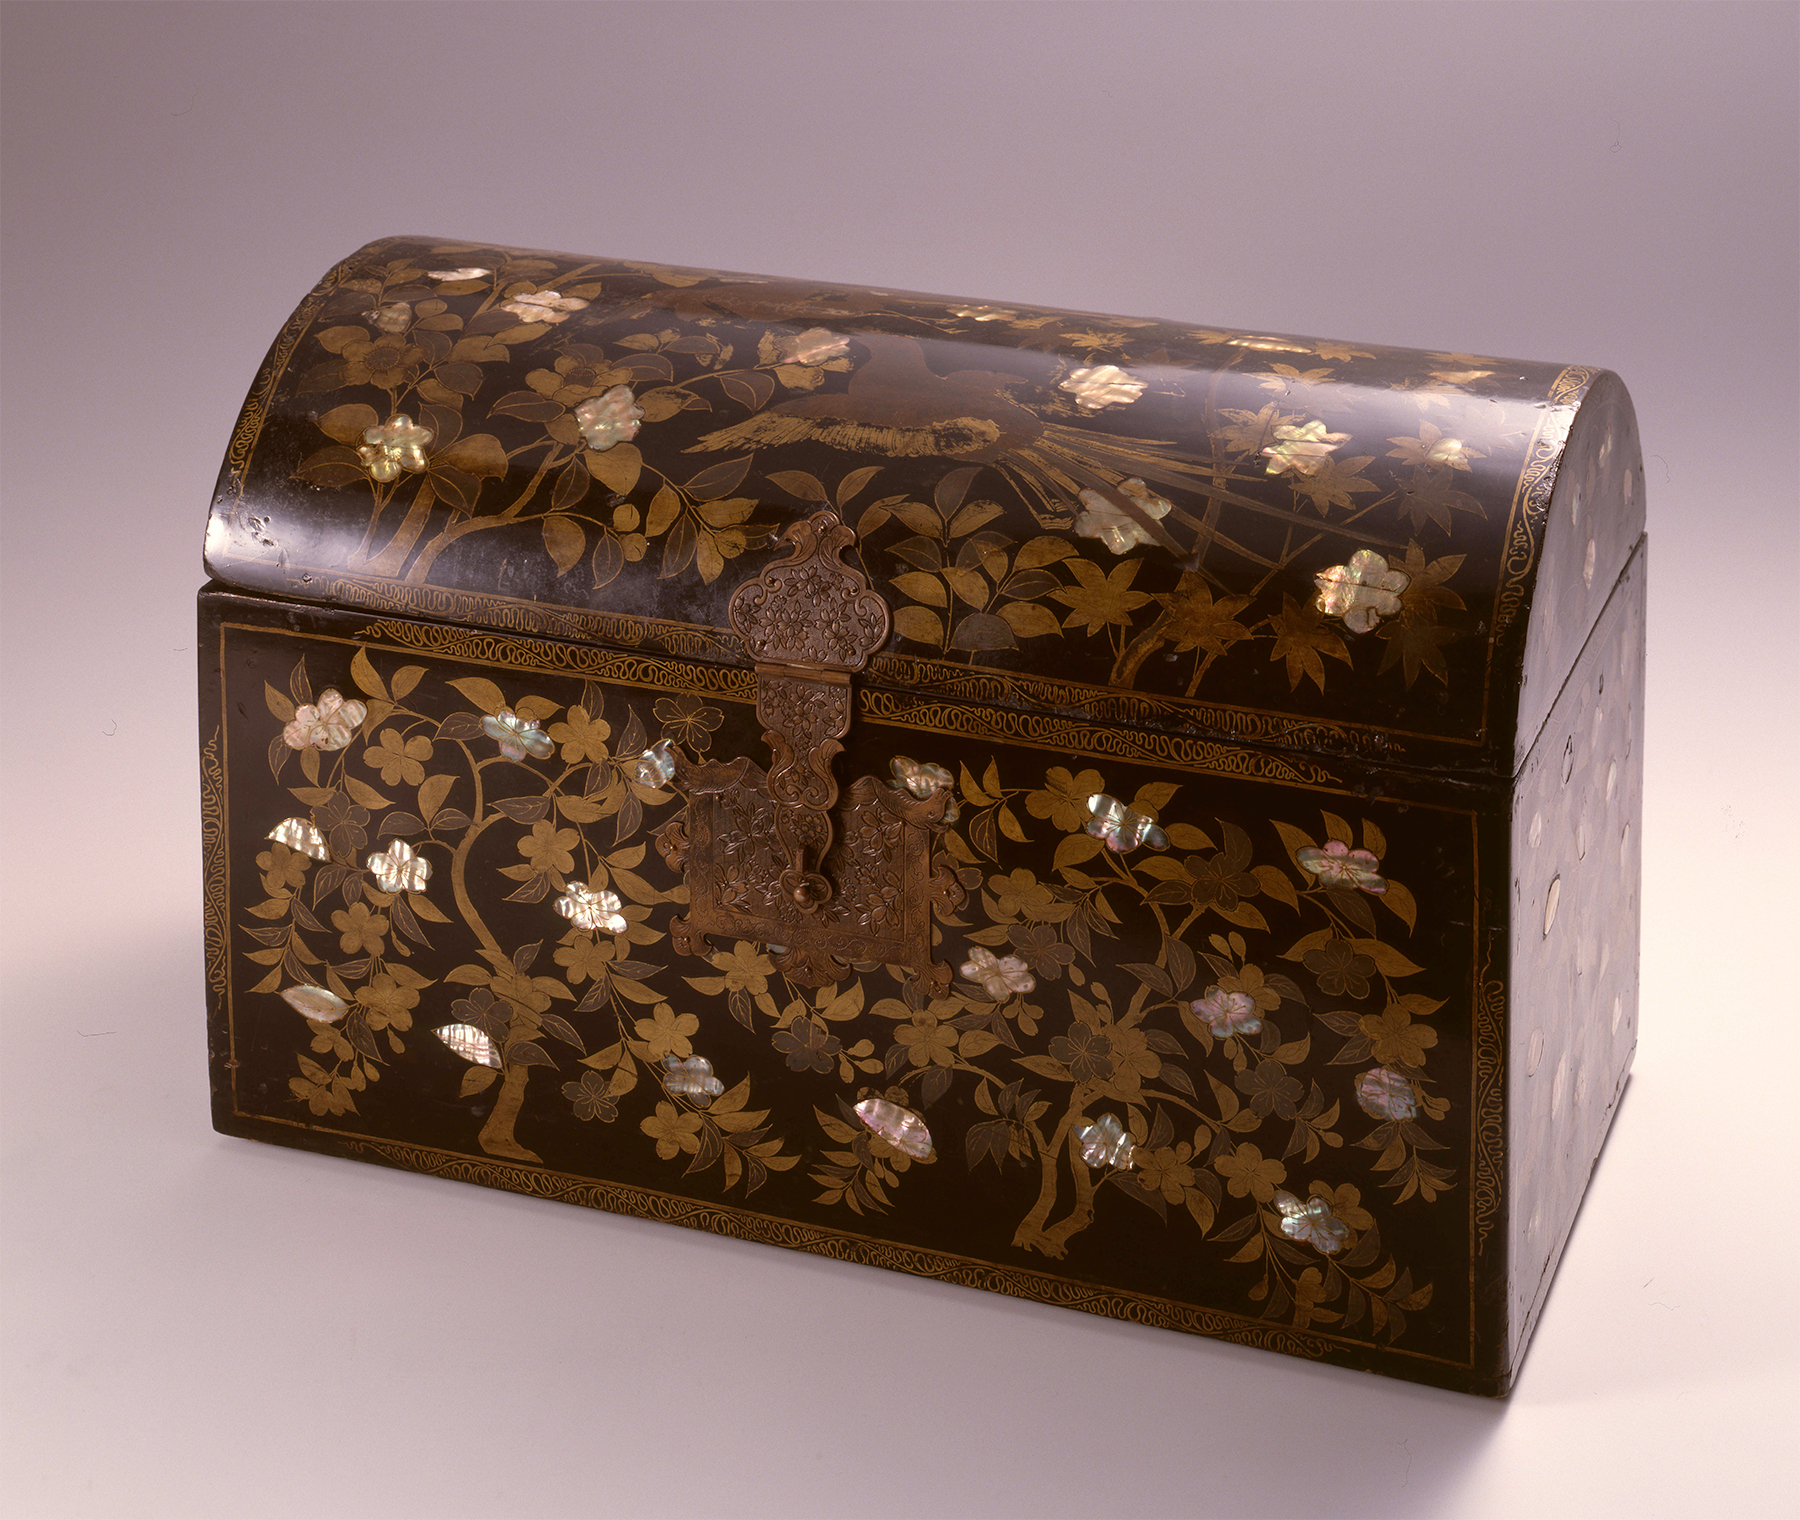 European-style Chest with Flowers and Birds in Makie and Mother-of-Pearl Inlay